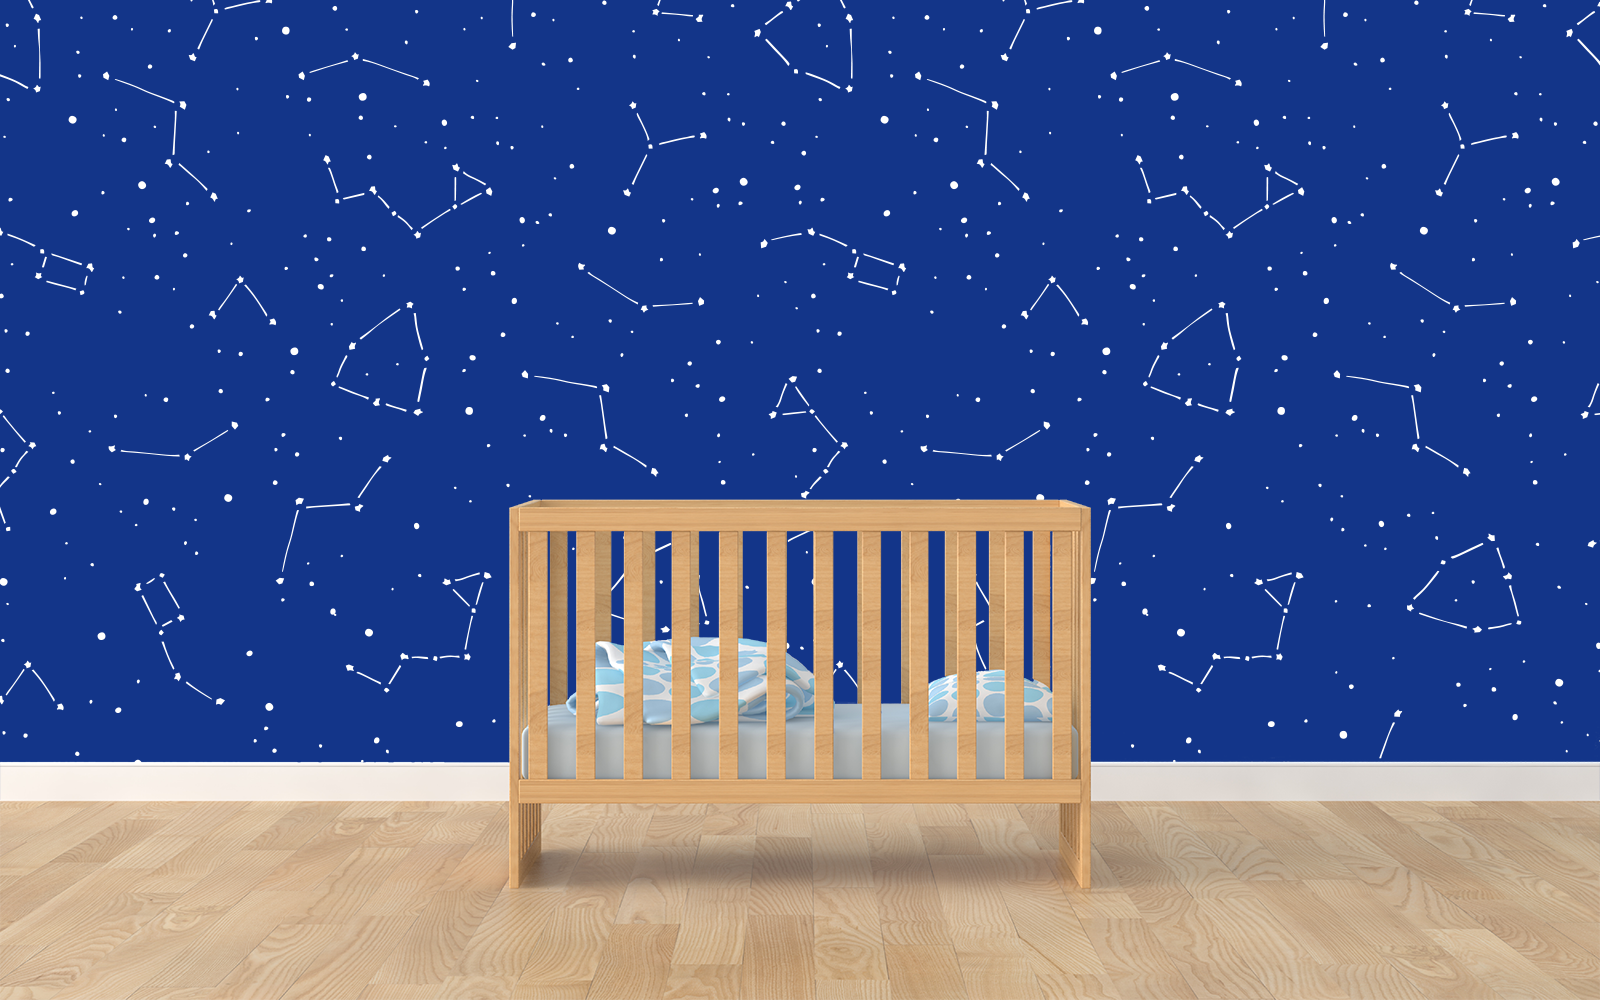 Graphic of hand-drawn constellations on a deep blue wall behind a wooden crib on a hardwood floor.